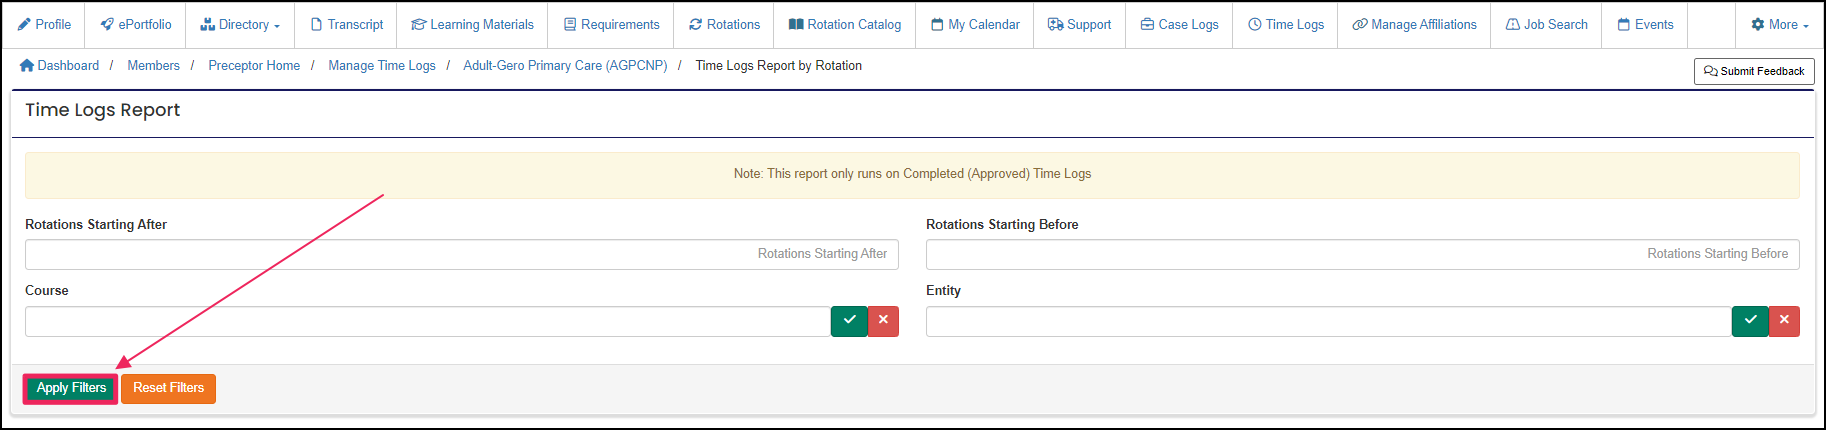 Time Log report highlighting Apply Filters button